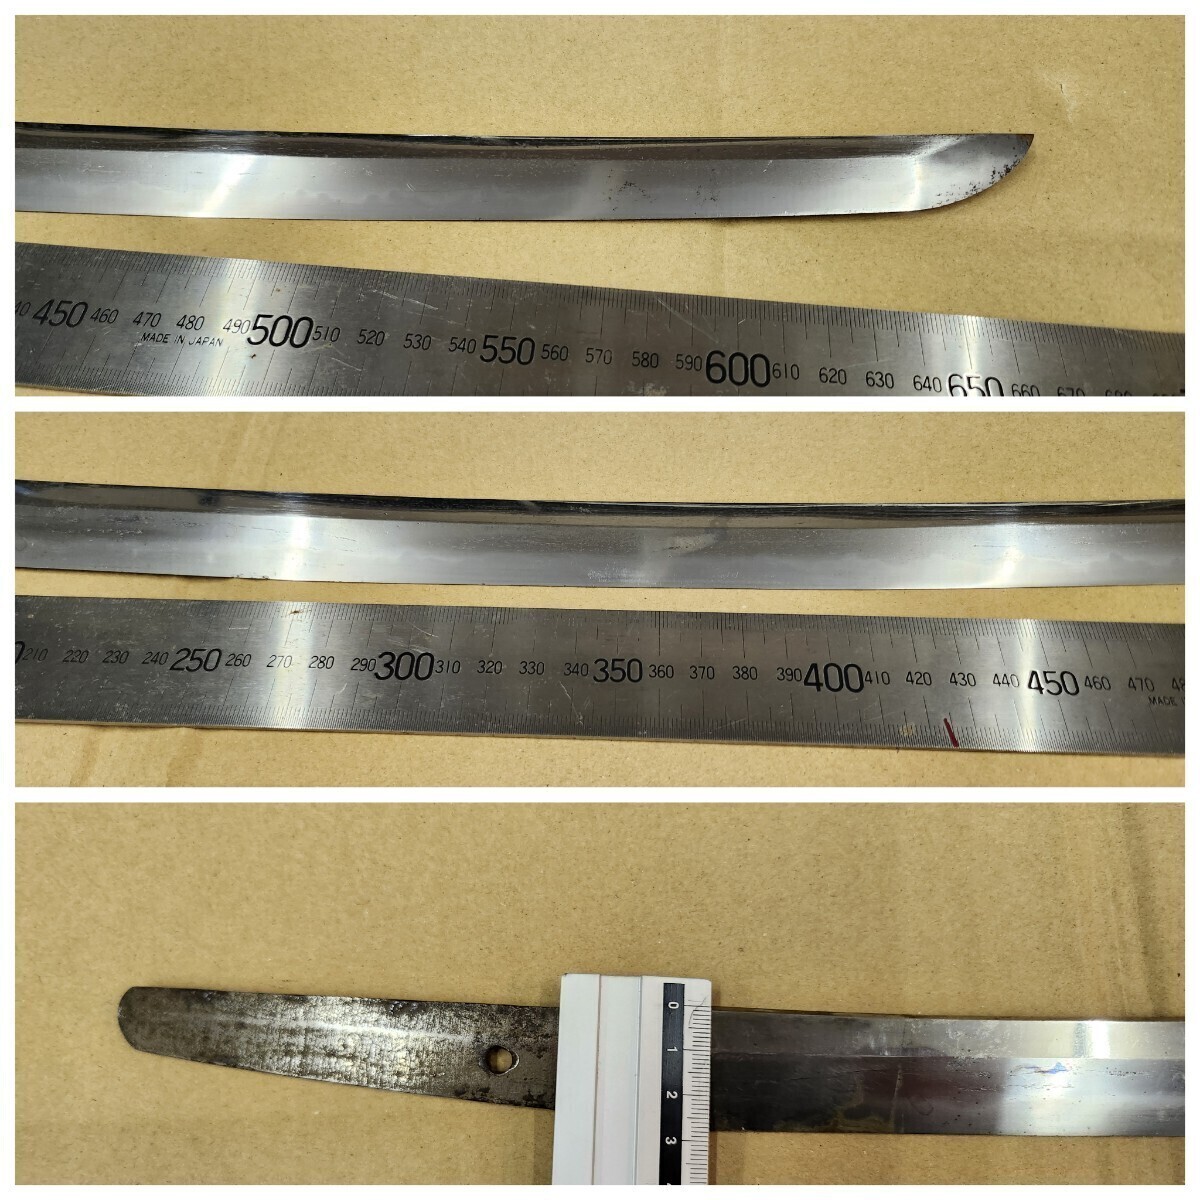  Japanese sword short sword wrinkle ...( firearms and swords kind registration card attaching ) blade length 53.3 centimeter ( commodity explanation . certainly reading please )*... sword pattern scabbard 